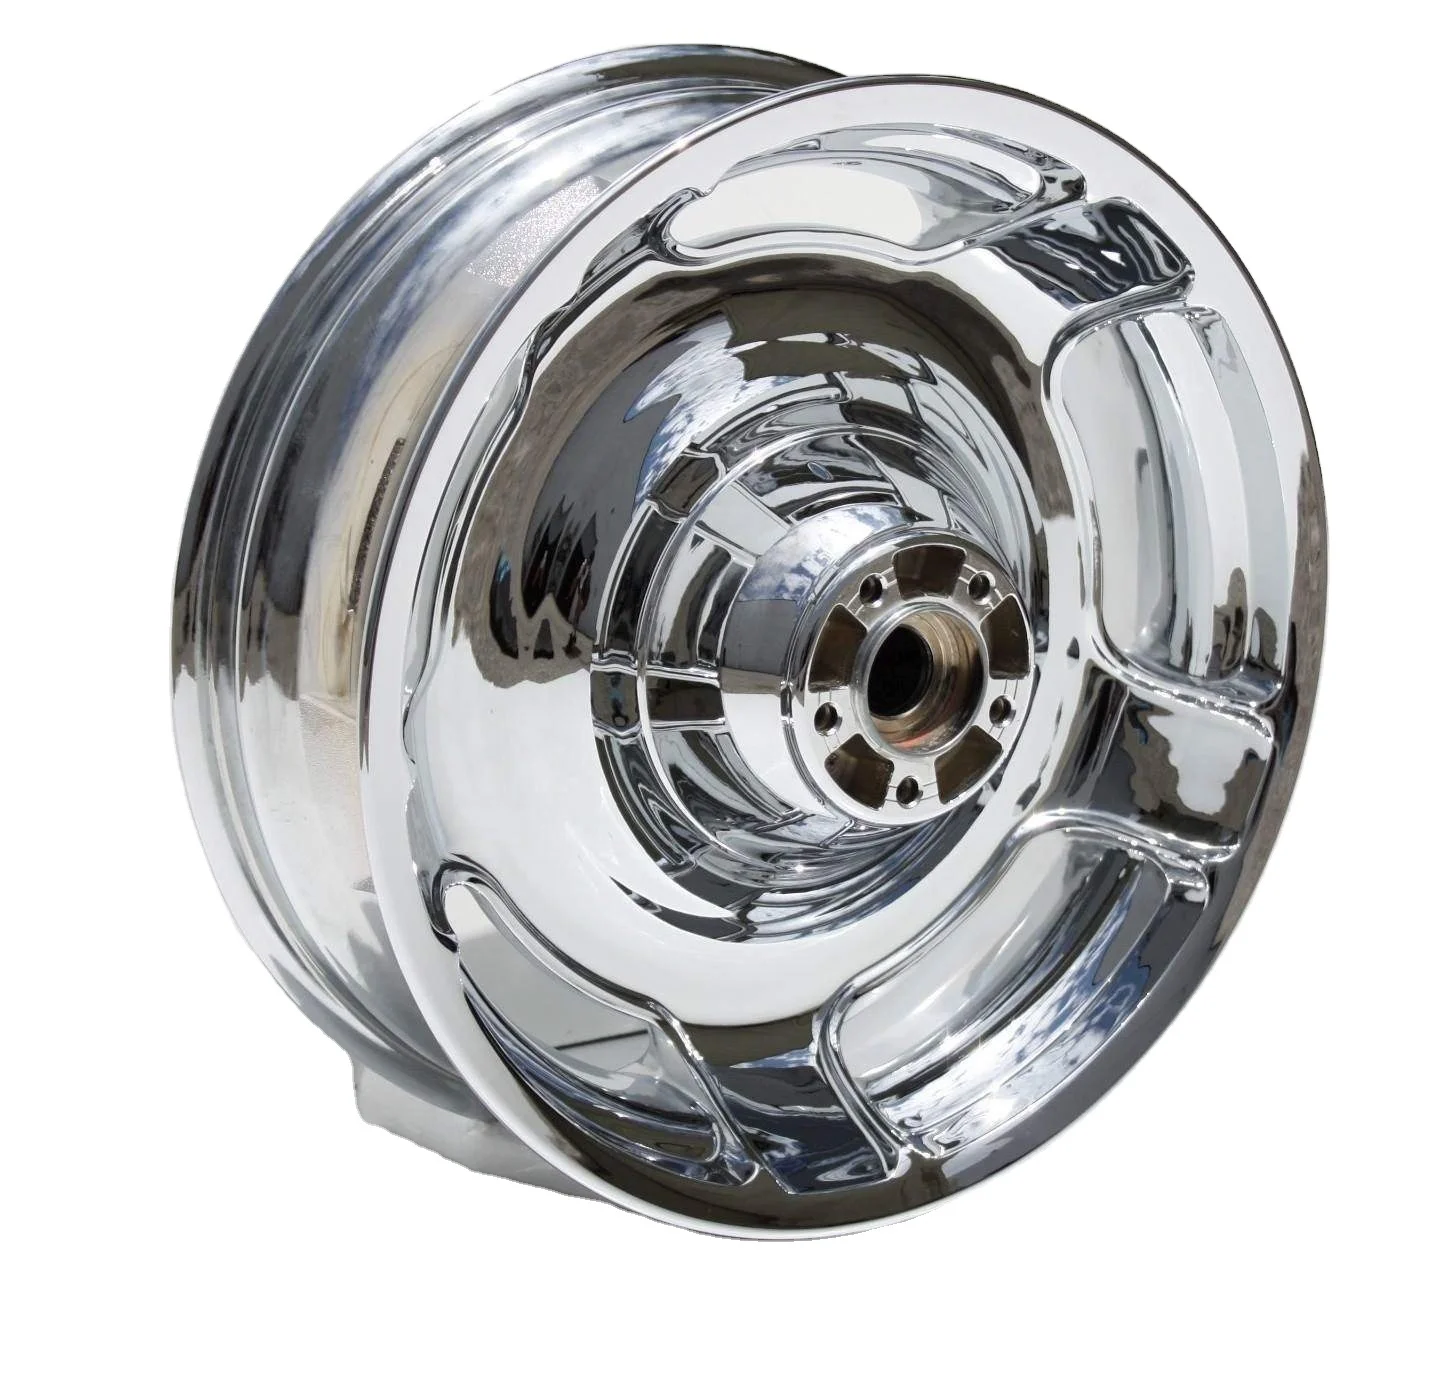 Super Quality High Performance 18 Inch Harley Davidson Motorbike Alloy Wheels Motorcycle Spare Parts Buy Harley Davidson Motorbike Alloy Wheels Harley Davidson Motorcycle Spare Parts 18 Inch Harley Davidson Motorcycle Alloy Wheels Product